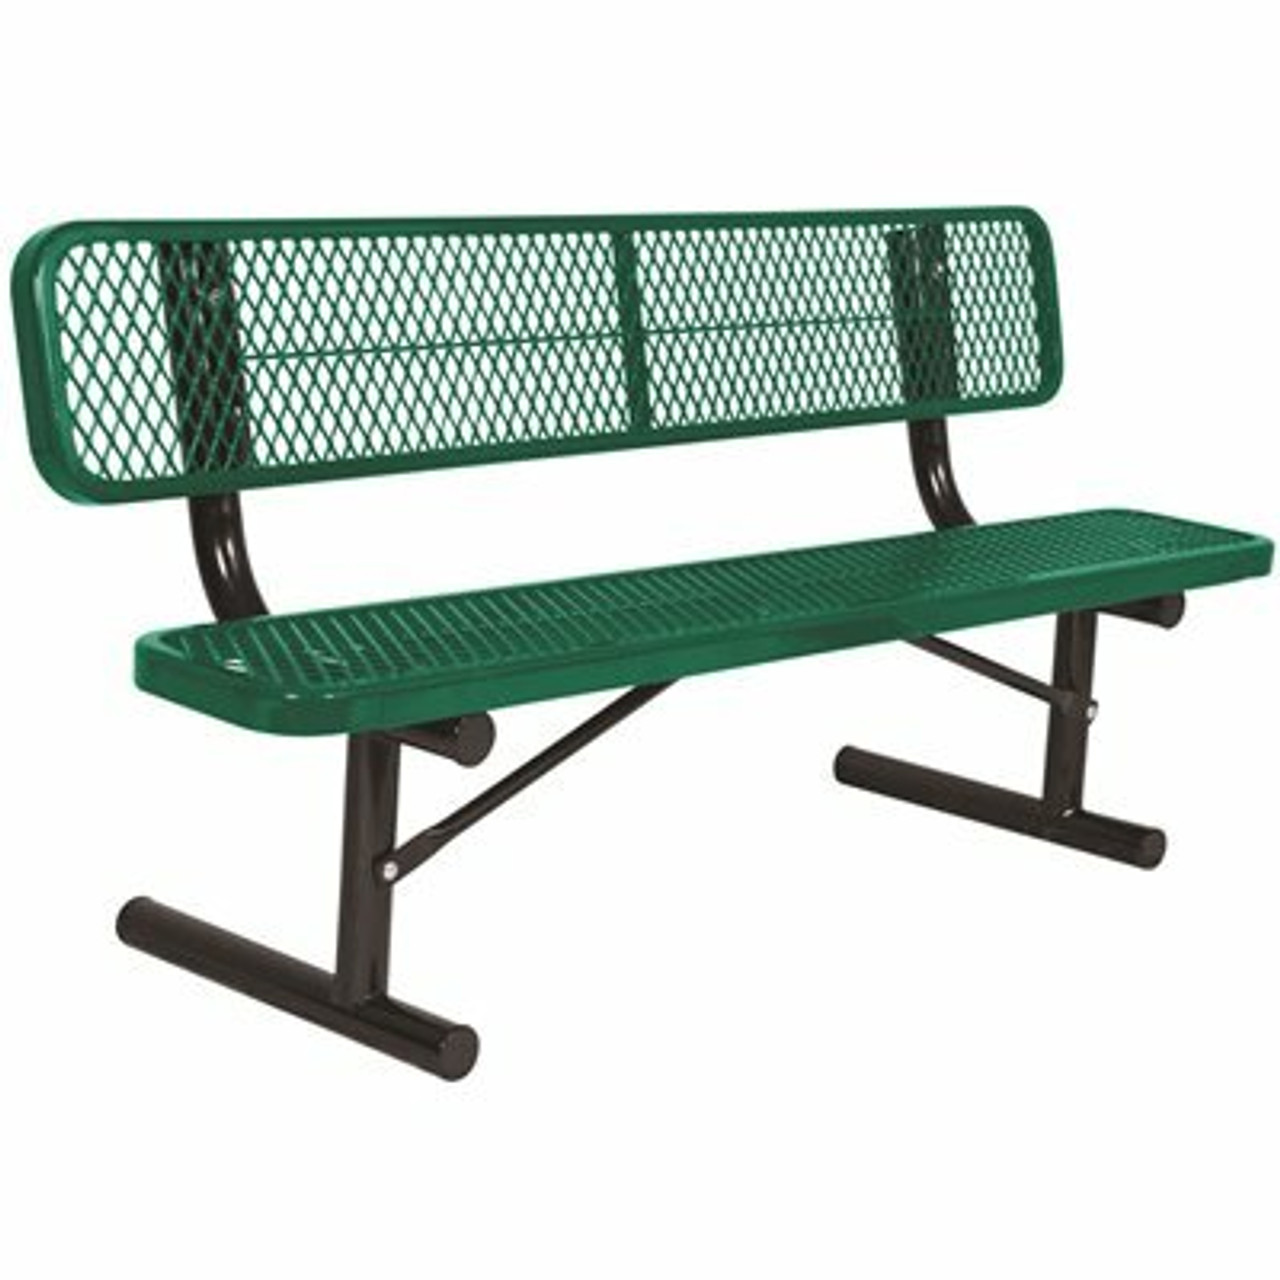 Everest 6 Ft. Green Portable Park Bench With Back